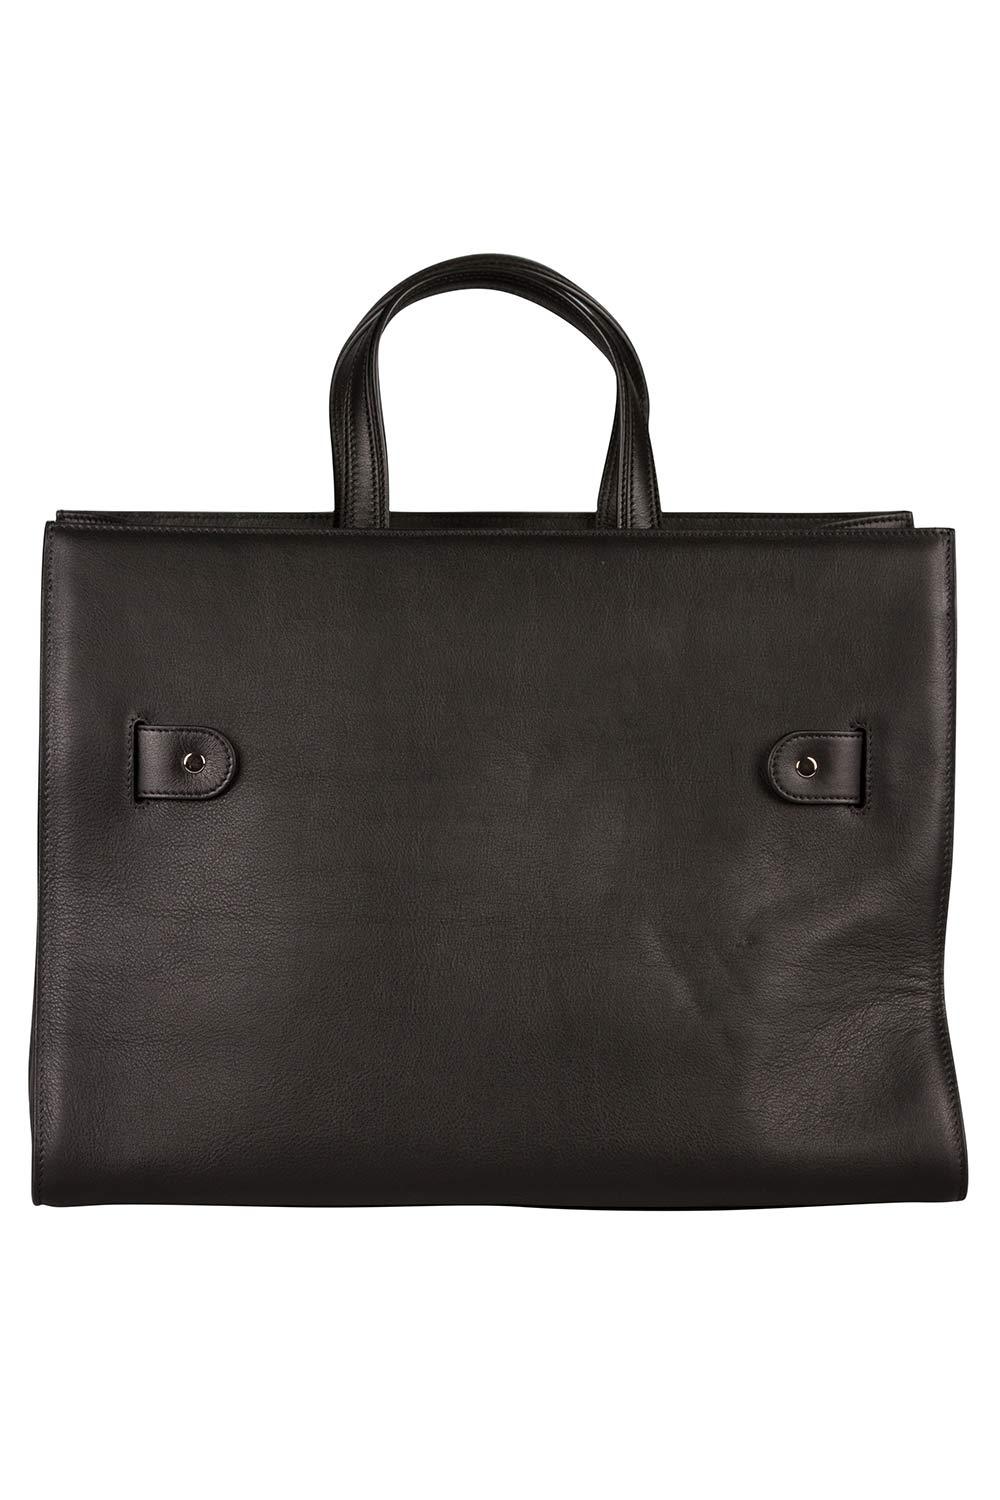 This PS11 tote by Proenza Schouler has a sophisticated look. Crafted from leather, it is held by two top handles. The top zipper opens to a spacious fabric interior and the bag is complete with a front silver-tone hardware detail. Team this fabulous